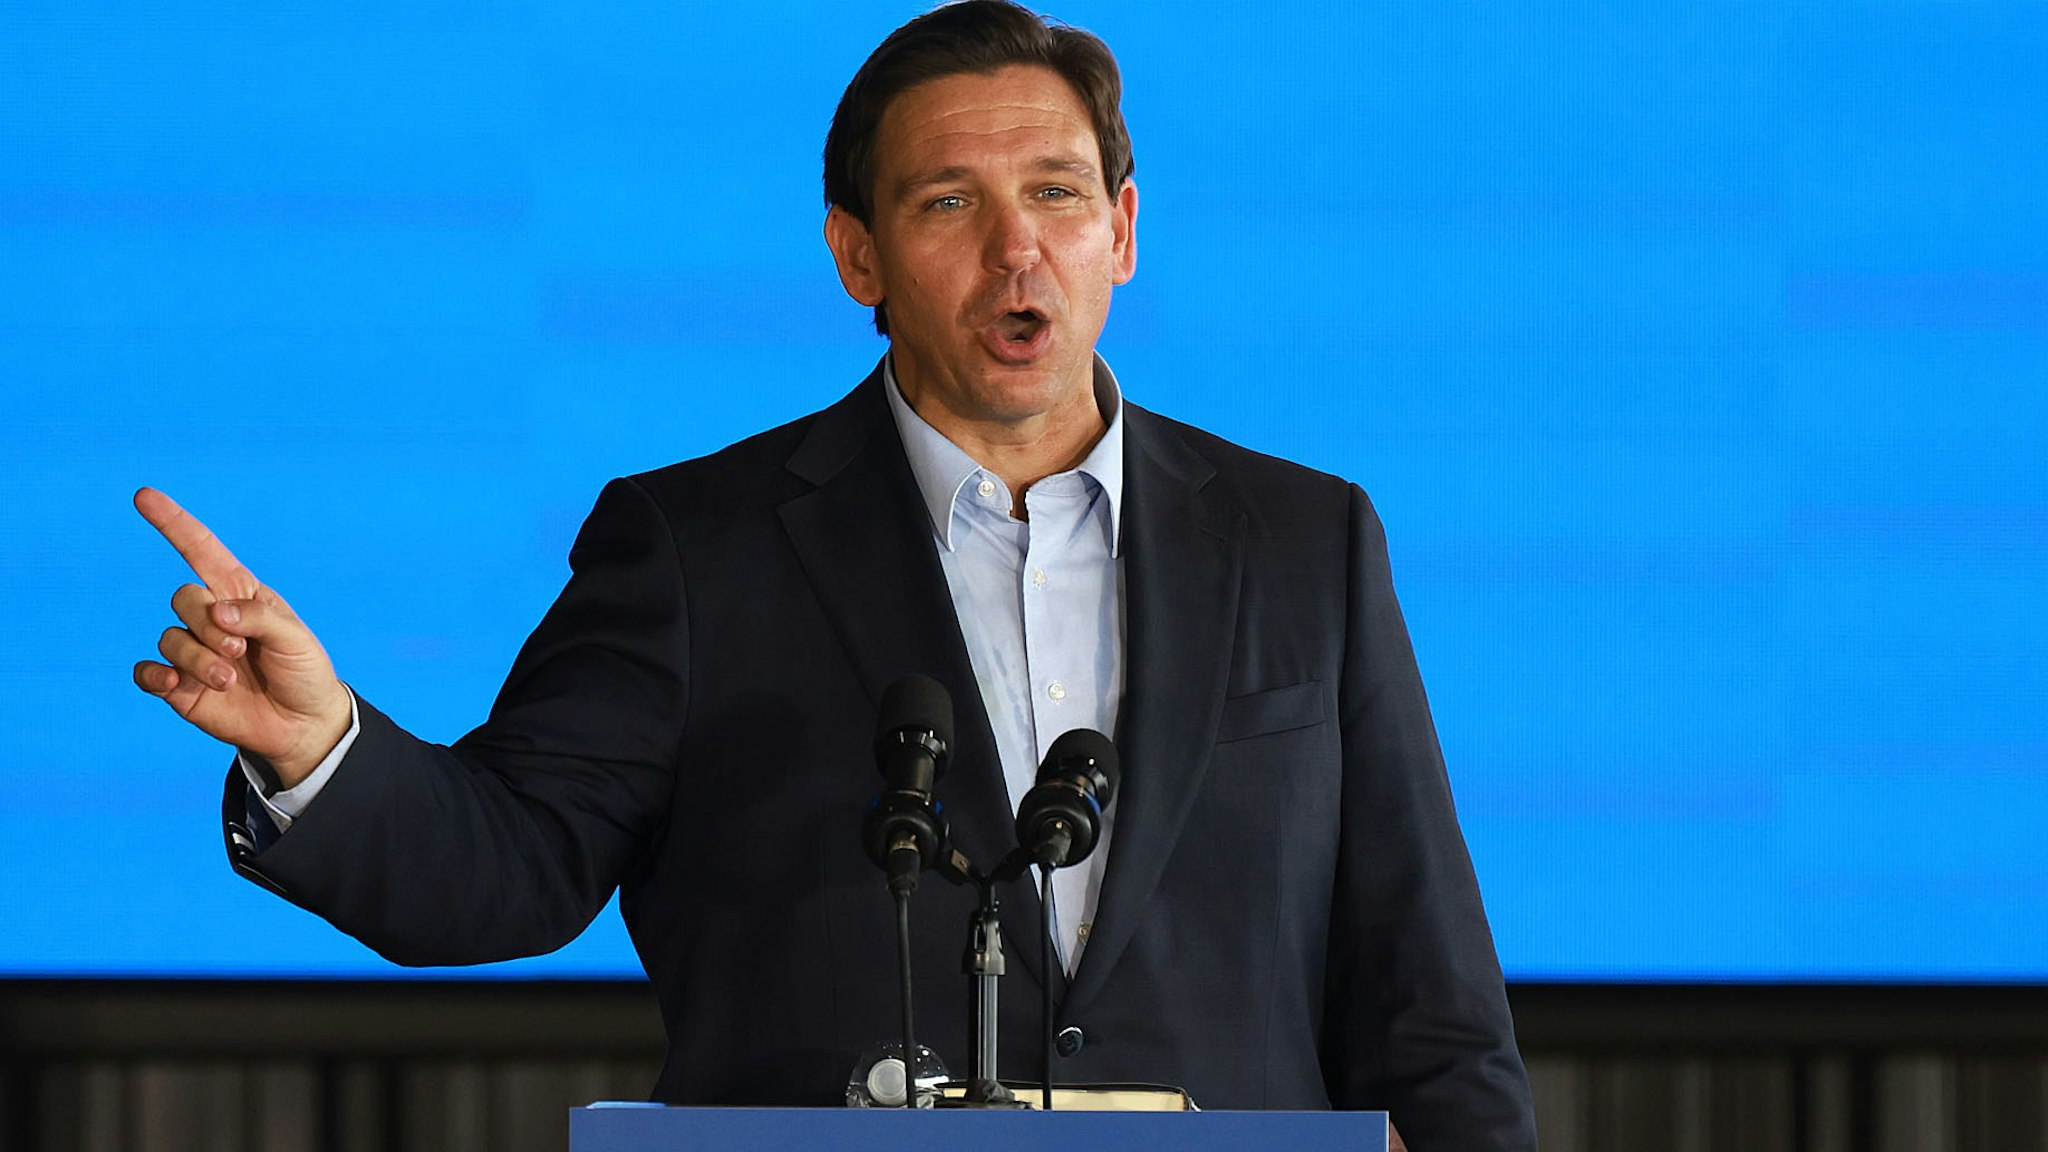 PINELLAS PARK, FLORIDA - MARCH 08: Florida Gov. Ron DeSantis speaks during an event spotlighting his newly released book, “The Courage To Be Free: Florida’s Blueprint For America’s Revival” at the Orange County Choppers Road House &amp; Museum on March 08, 2023 in Pinellas Park, Florida. Gov. DeSantis is reportedly preparing to run in the 2024 presidential election.